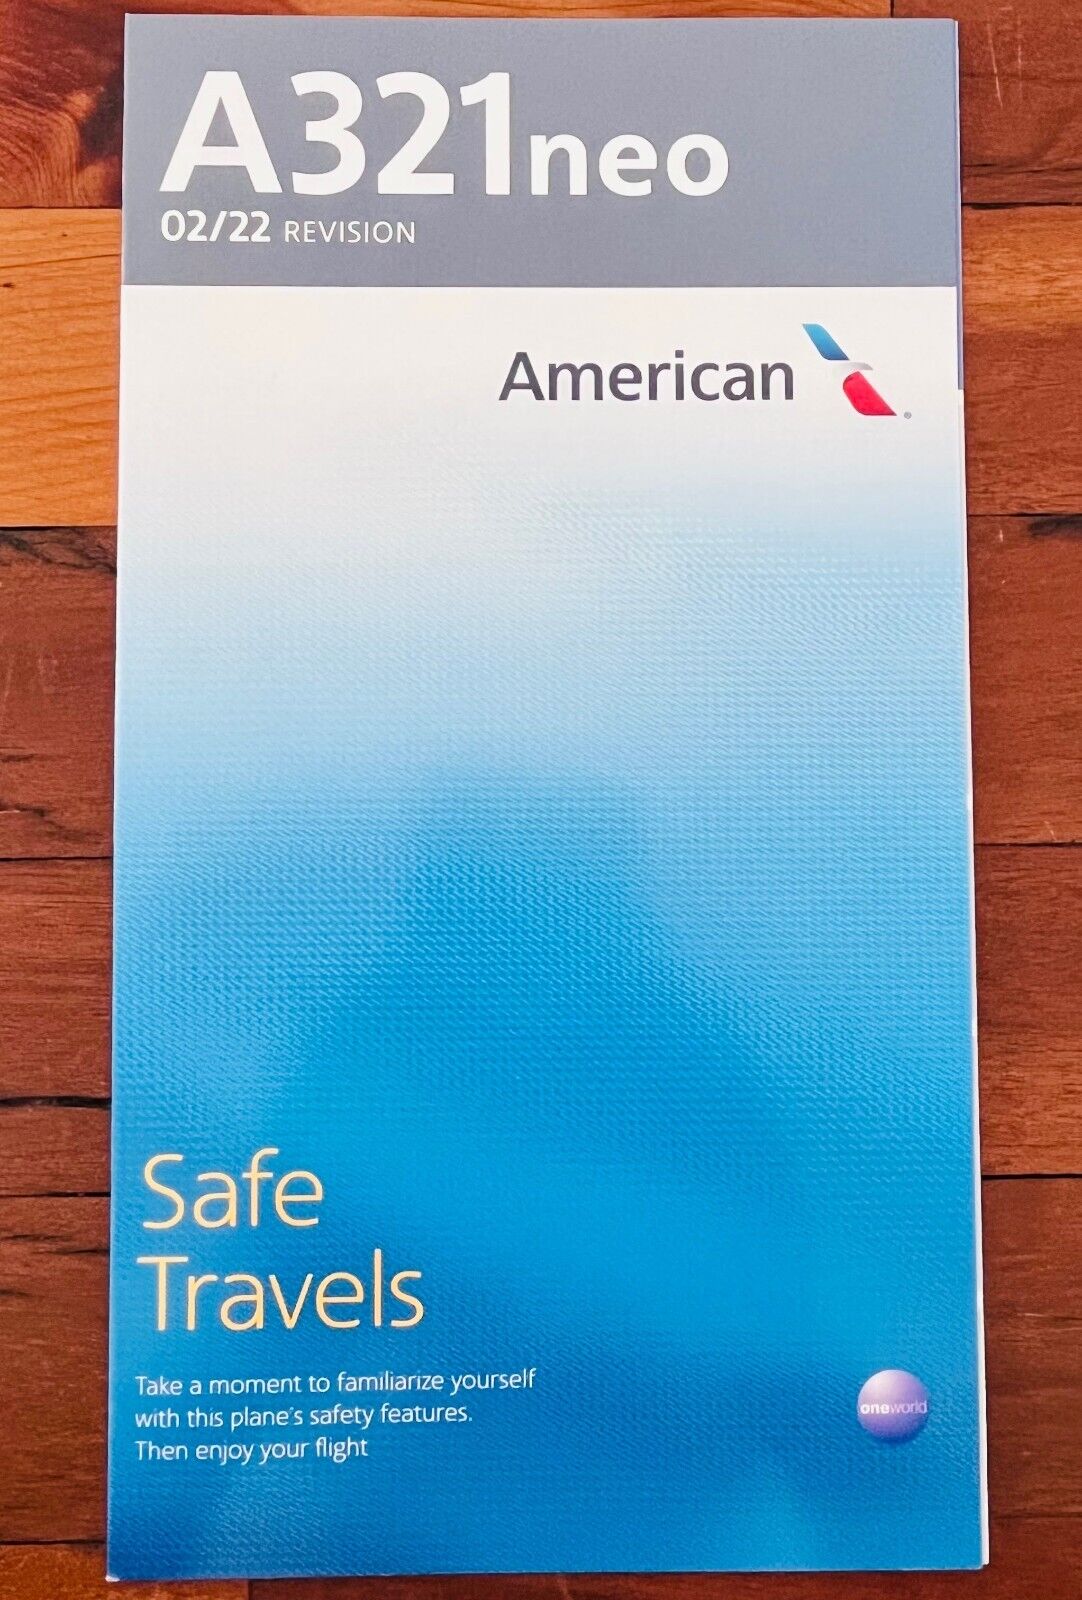 AMERICAN AIRLINES Airbus A321neo Airline Safety Card Instructions 2/2022 Rev